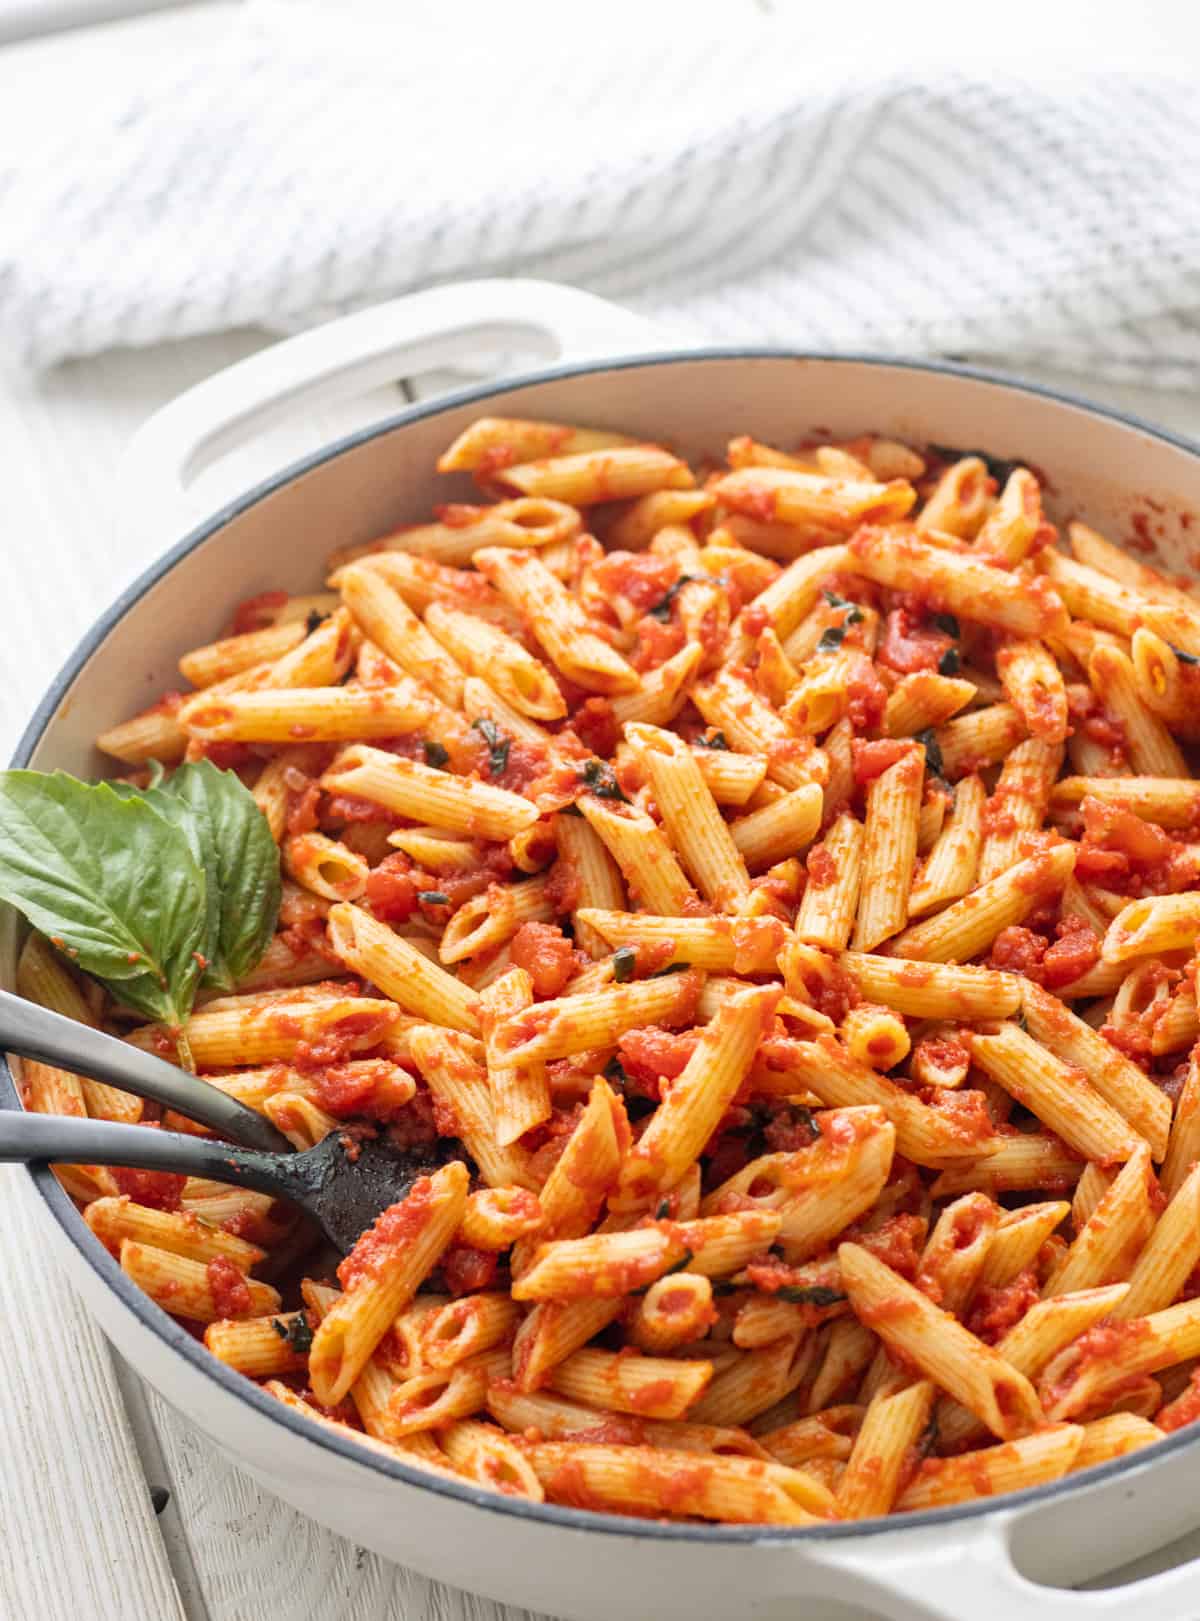 Penne pomodoro in a casserole dish with basil leaves and spoons.